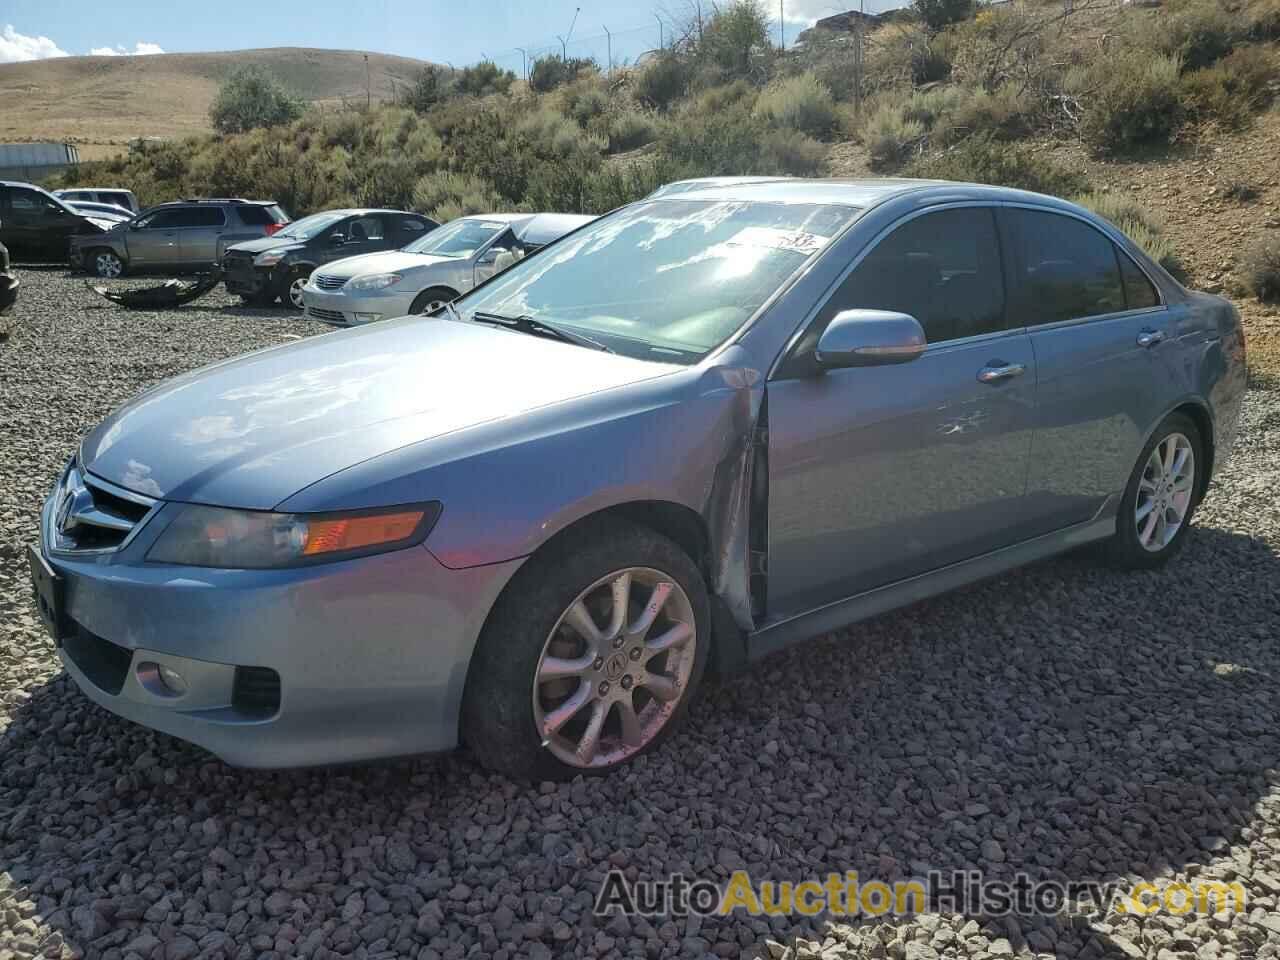 2008 ACURA TSX, JH4CL96908C001107